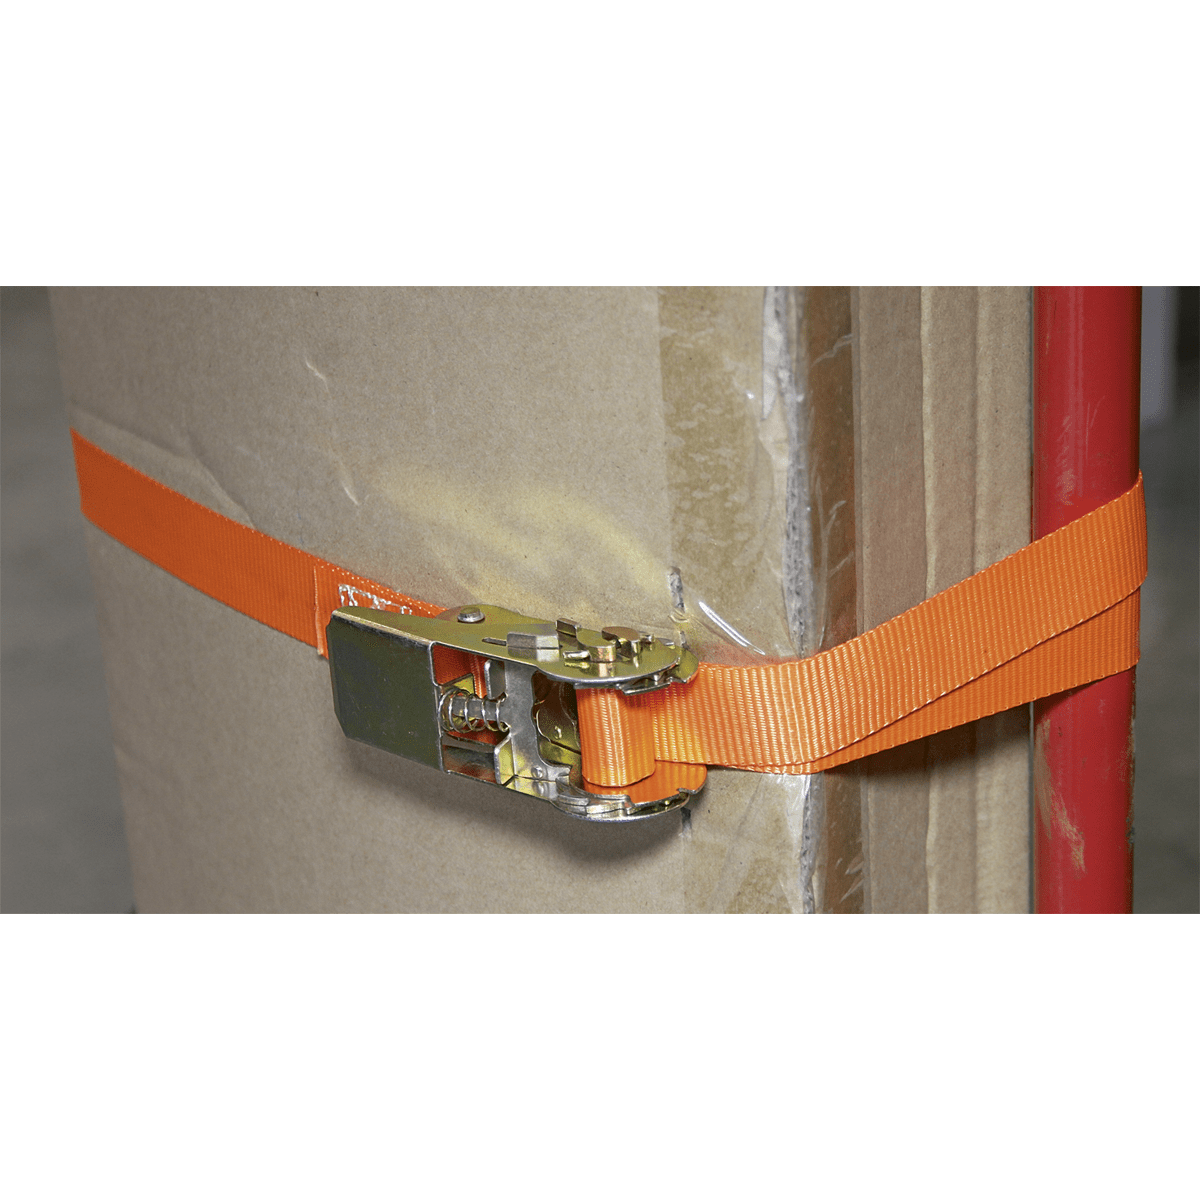 Sealey Self-Securing Ratchet Straps 25mm x 4.5m 500kg Breaking Strength - Pair